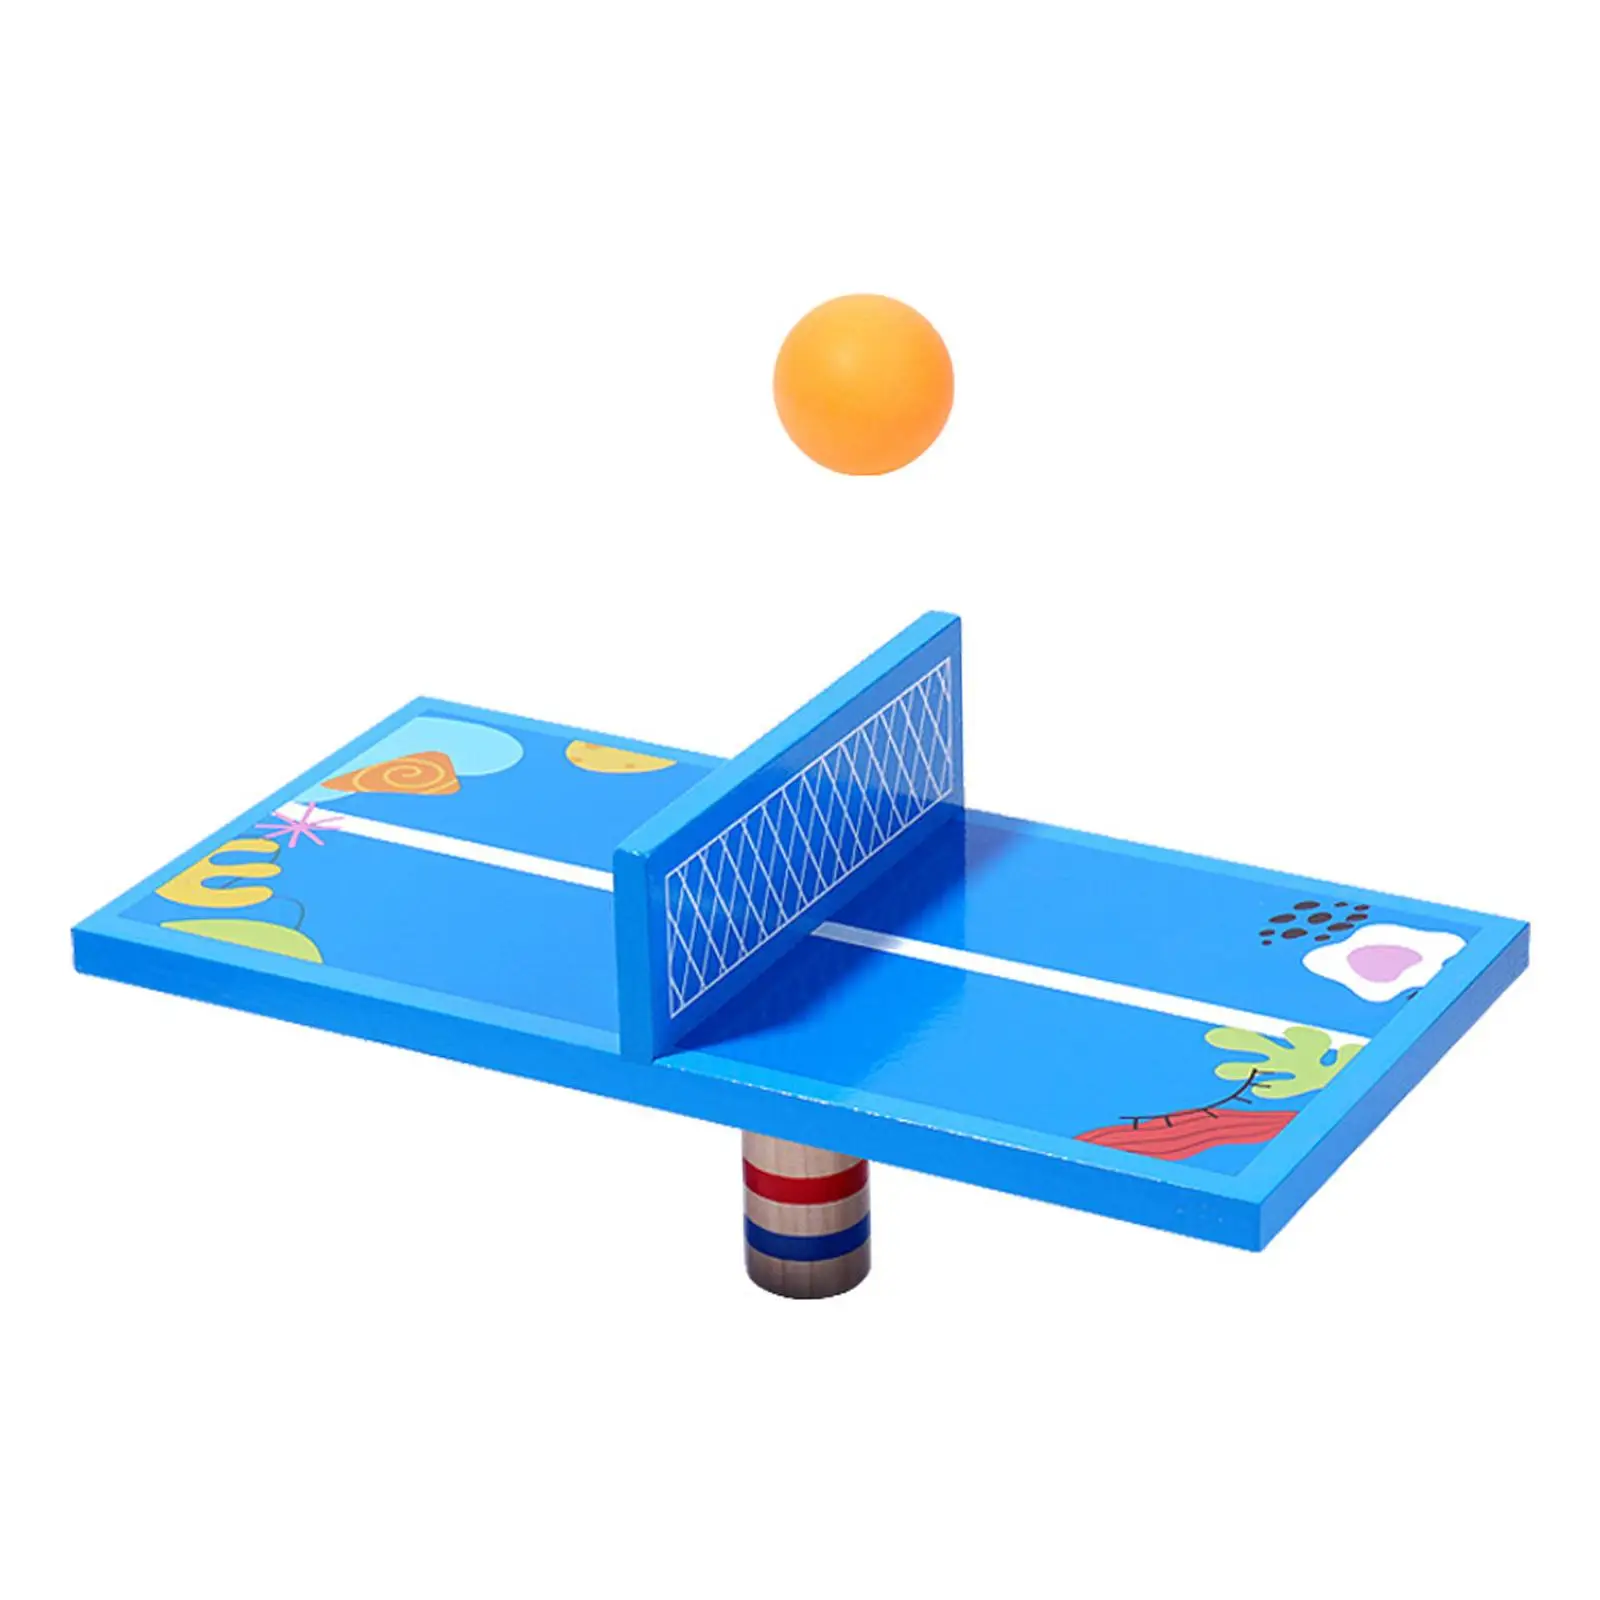 Mini Pingpong Table Game Intellectual Developmental for Birthday Gifts